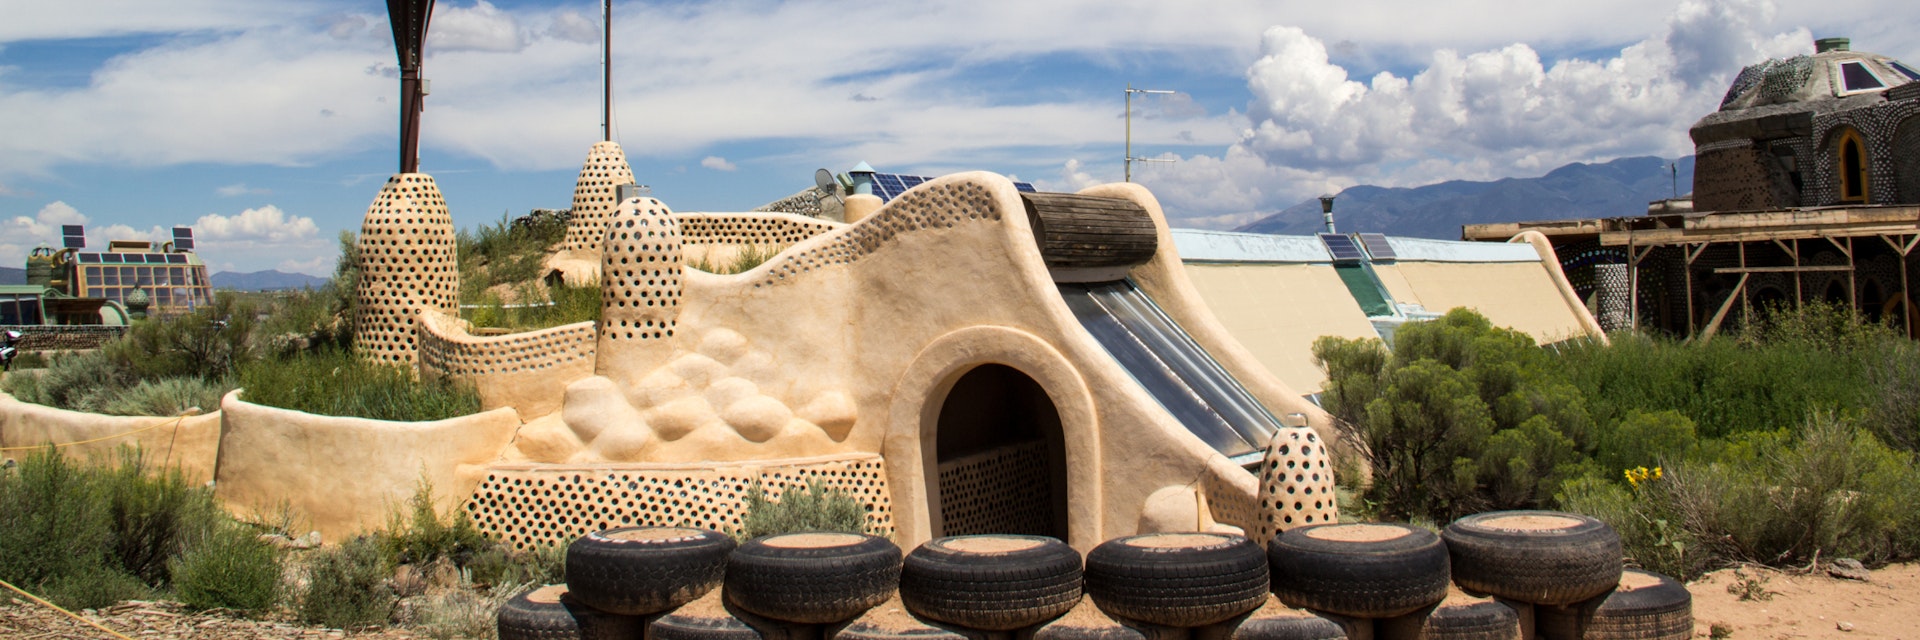 TAOS, NEW MEXICO-AUGUST 13: Building materials sit outside an earthship being built in Taos on August 13, 2014. Earthships are environmentally friendly homes made of recycled materials.; Shutterstock ID 210755425; Your name (First / Last): Alexander Howard; GL account no.: 65050; Netsuite department name: Online Editorial; Full Product or Project name including edition: Southwest POIs